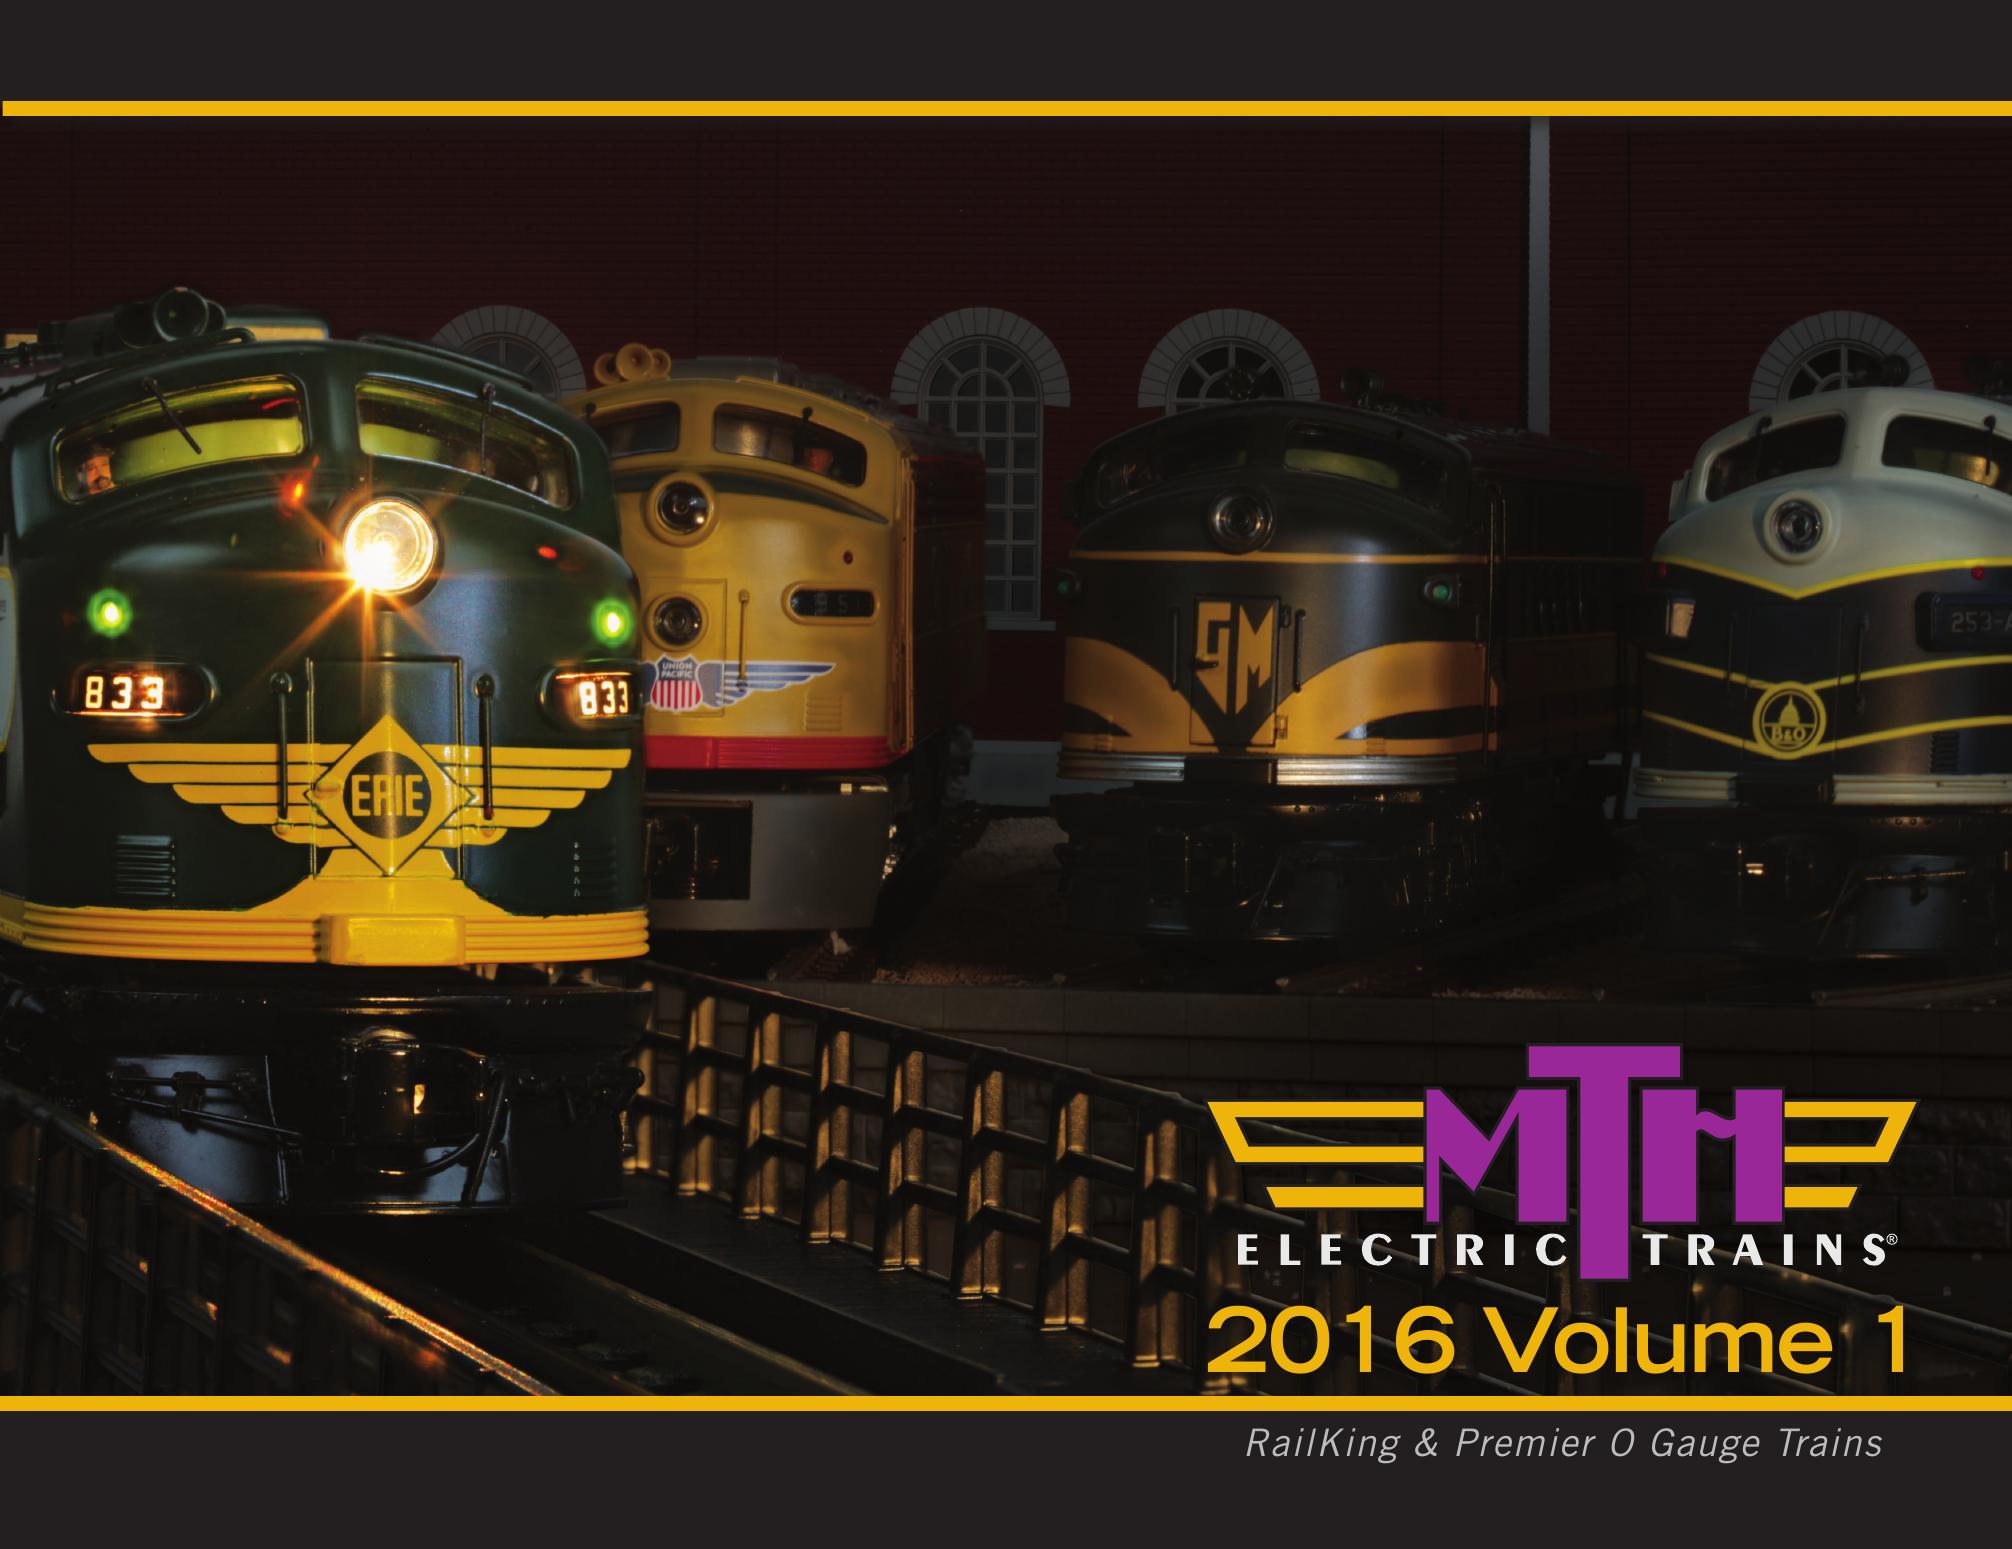 MTH Electric Trains BRAND NEW Year 2018 Vol 1 & 2 Catalogs Railking & Premier